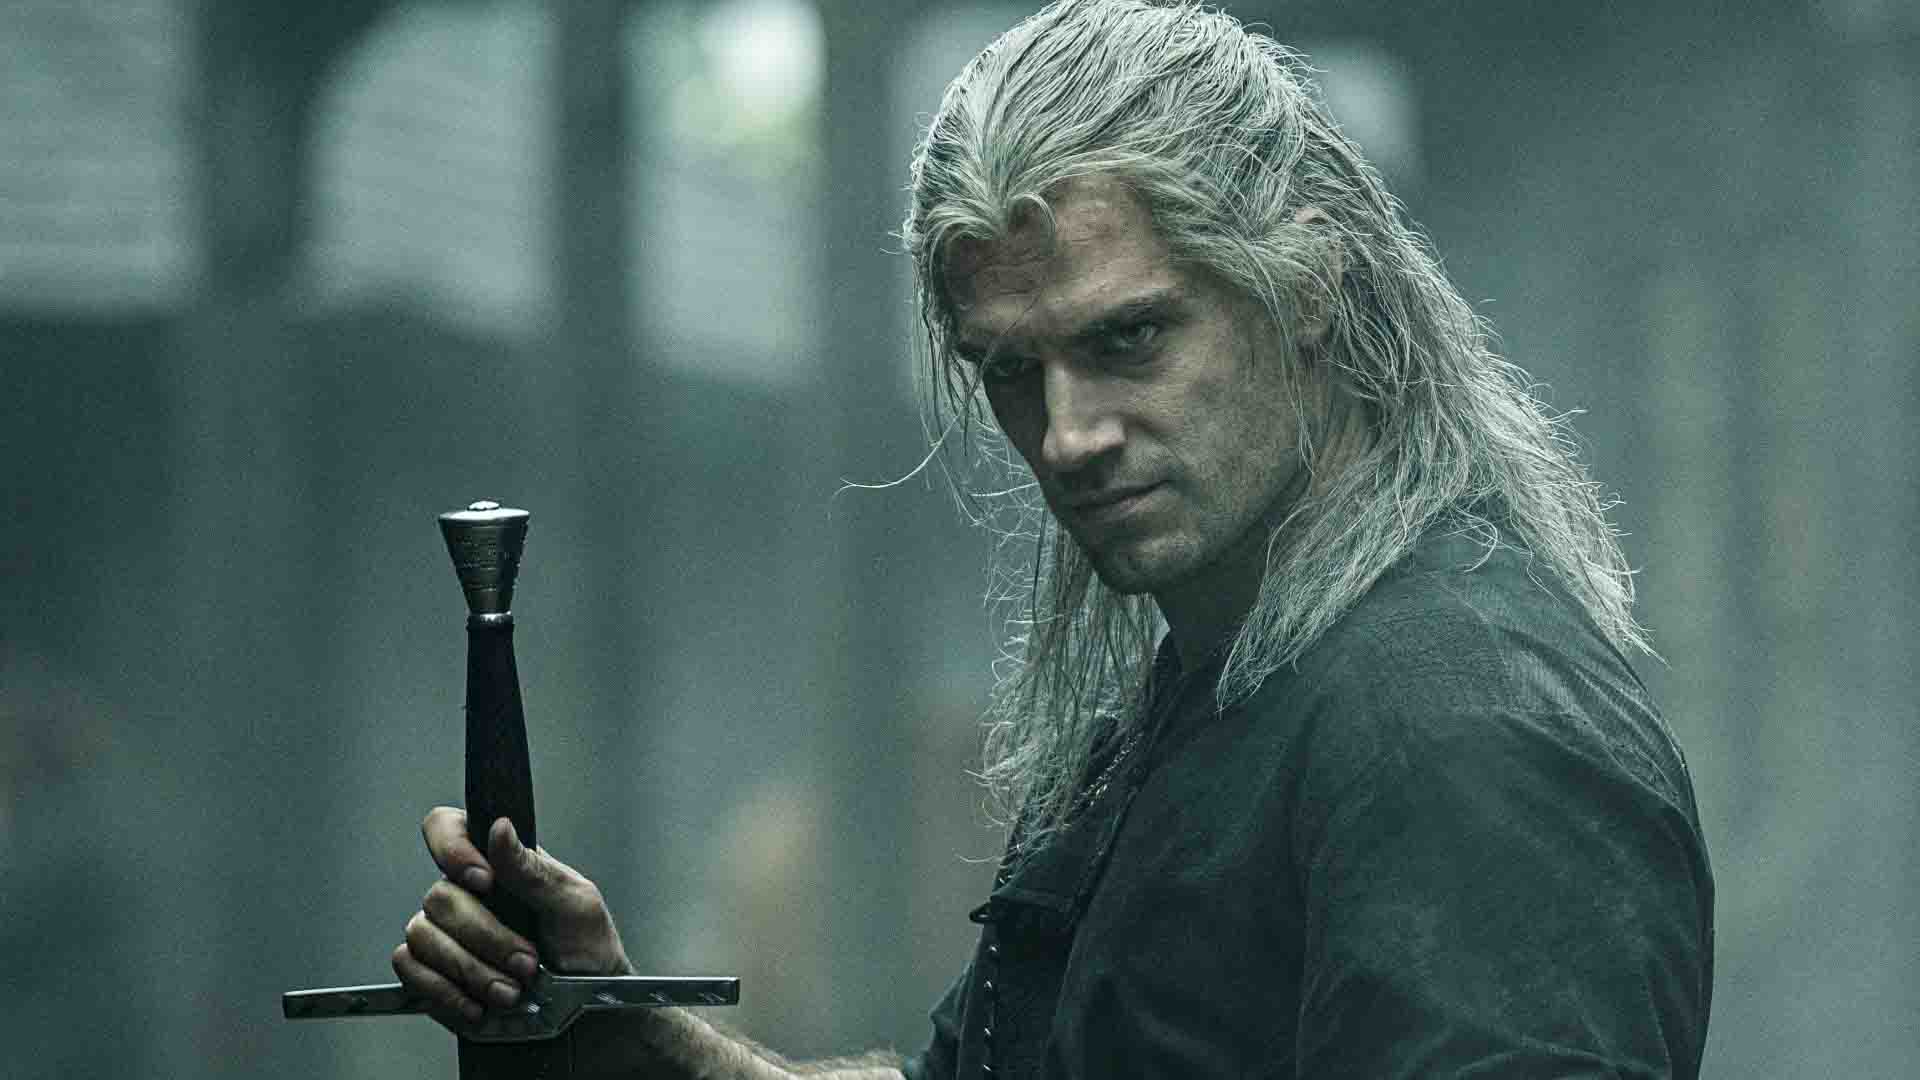 The Witcher TV series — Geralt scowls at the camera, sword in hand.